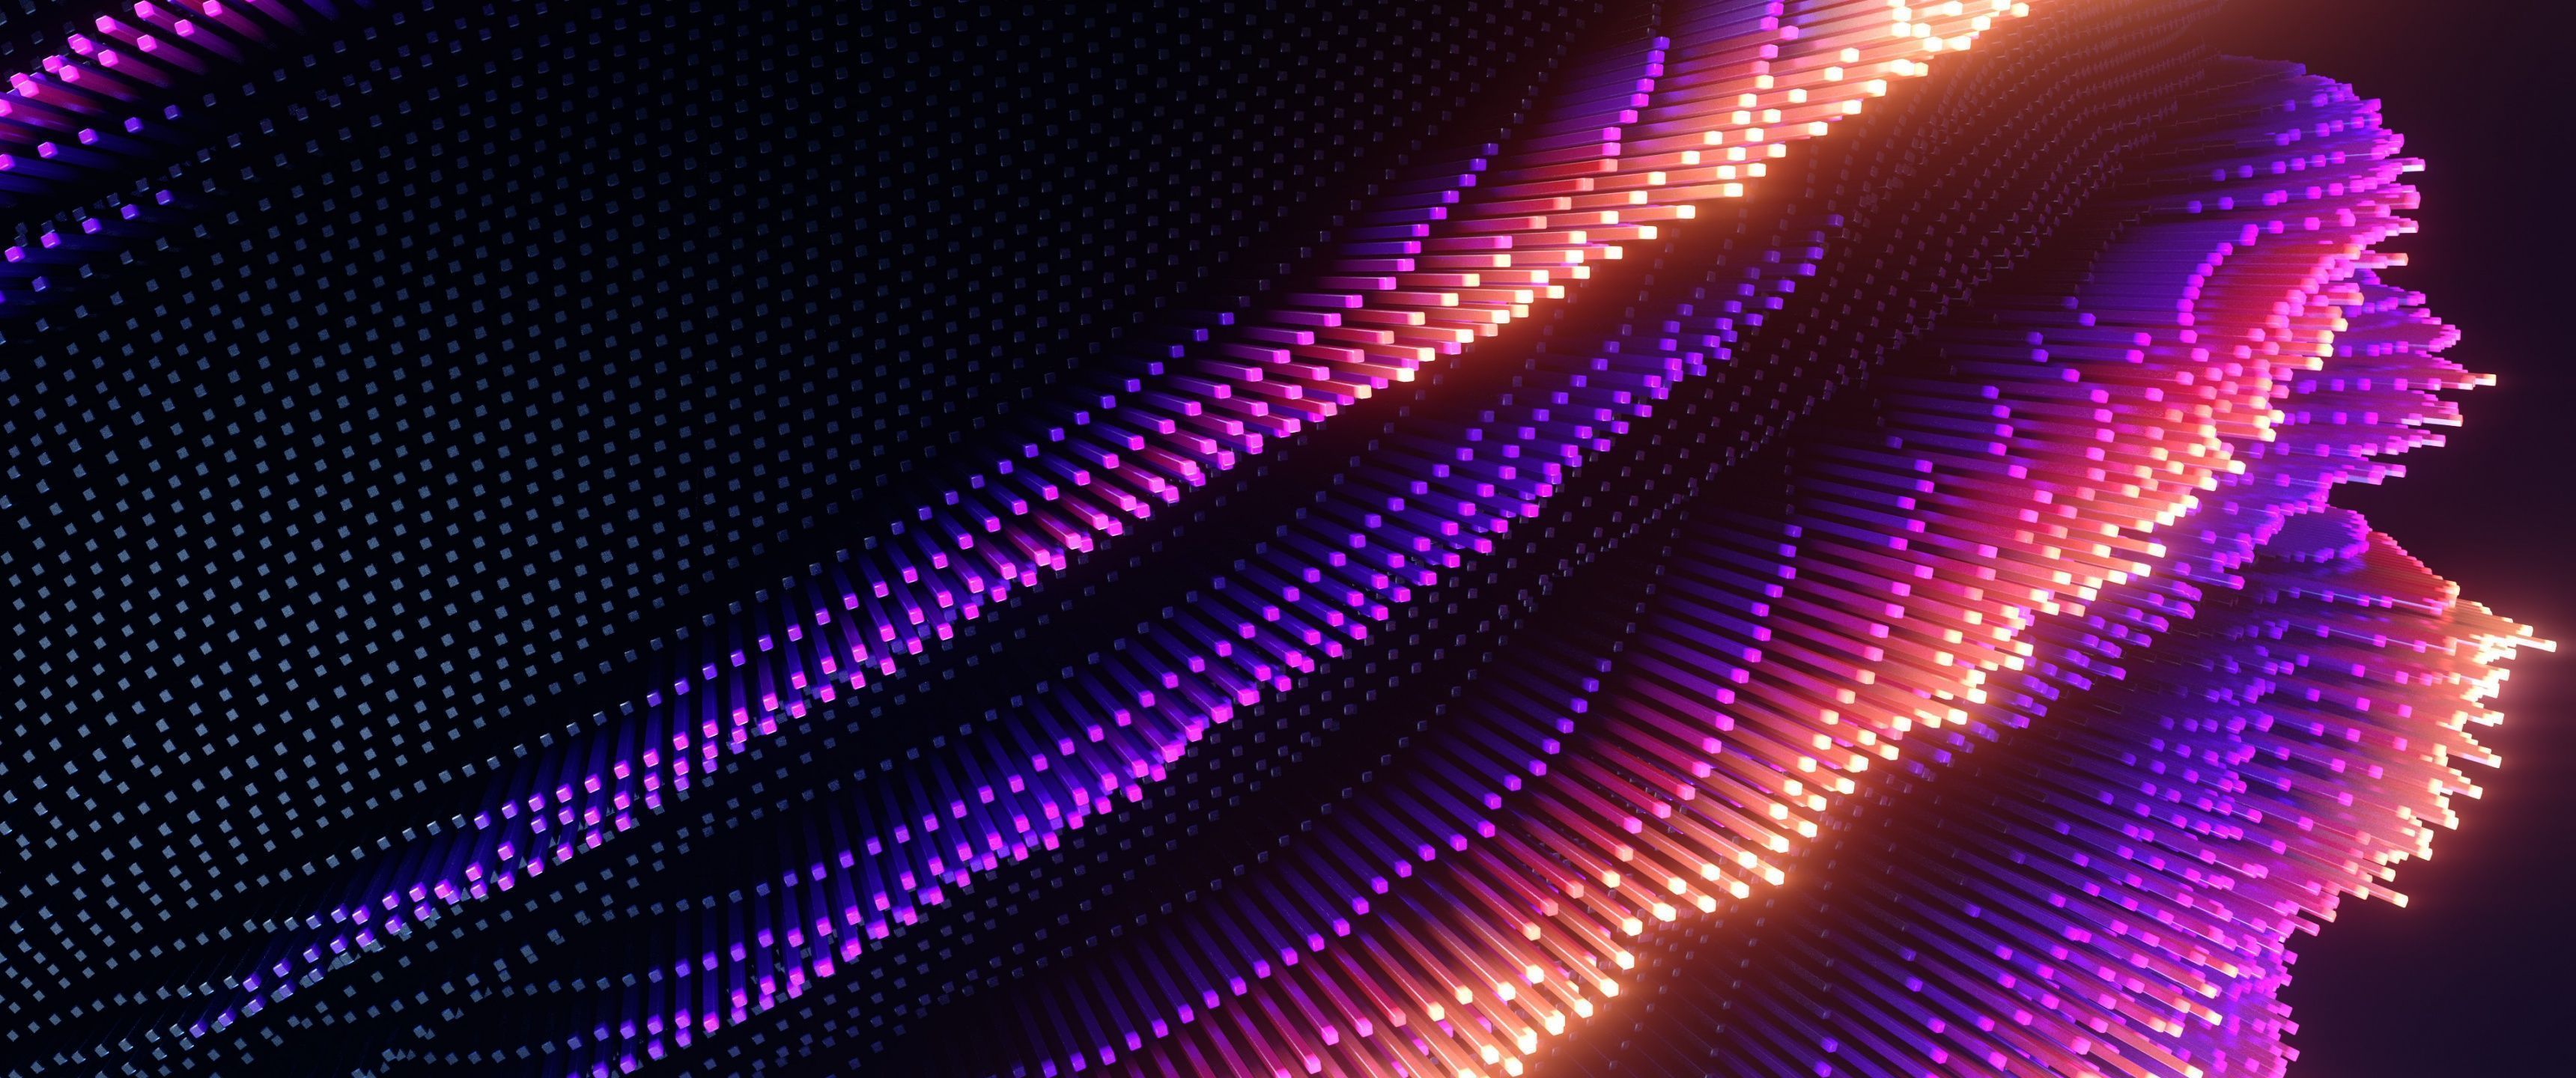 Abstract background Wallpaper 4K, Purple aesthetic, Purple abstract